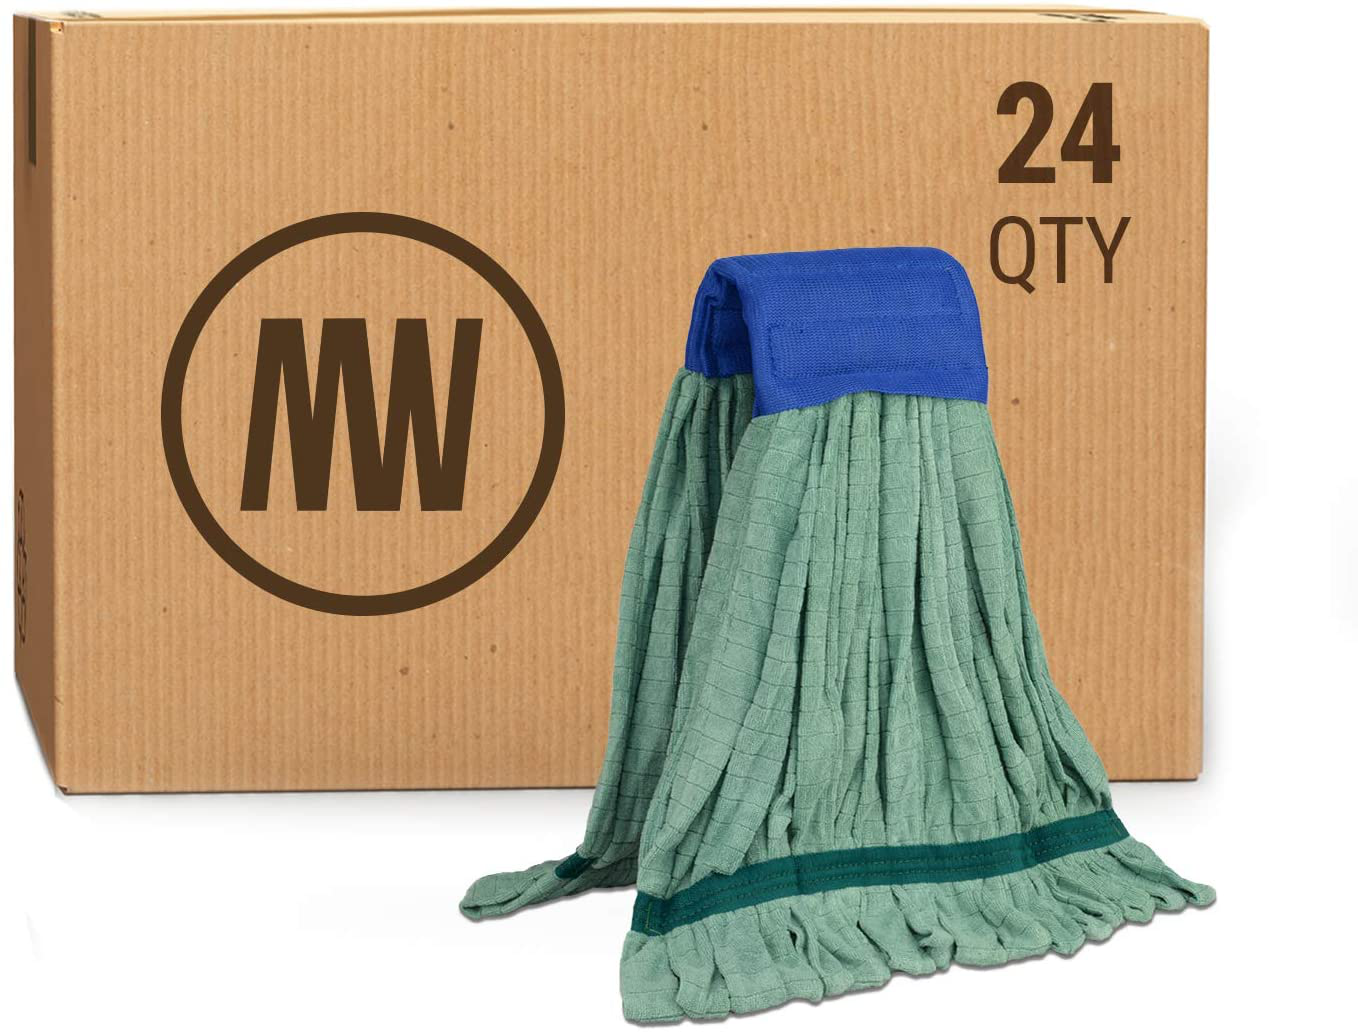 Commercial Mop Head Replacement - Large Microfiber Tube Mop (18 oz.) | Industrial Wet Mops | Washable Refill, Reusable, Heavy Duty, Looped End Mopheads | Hardwood, Tile, Laminate Floors (Blue)